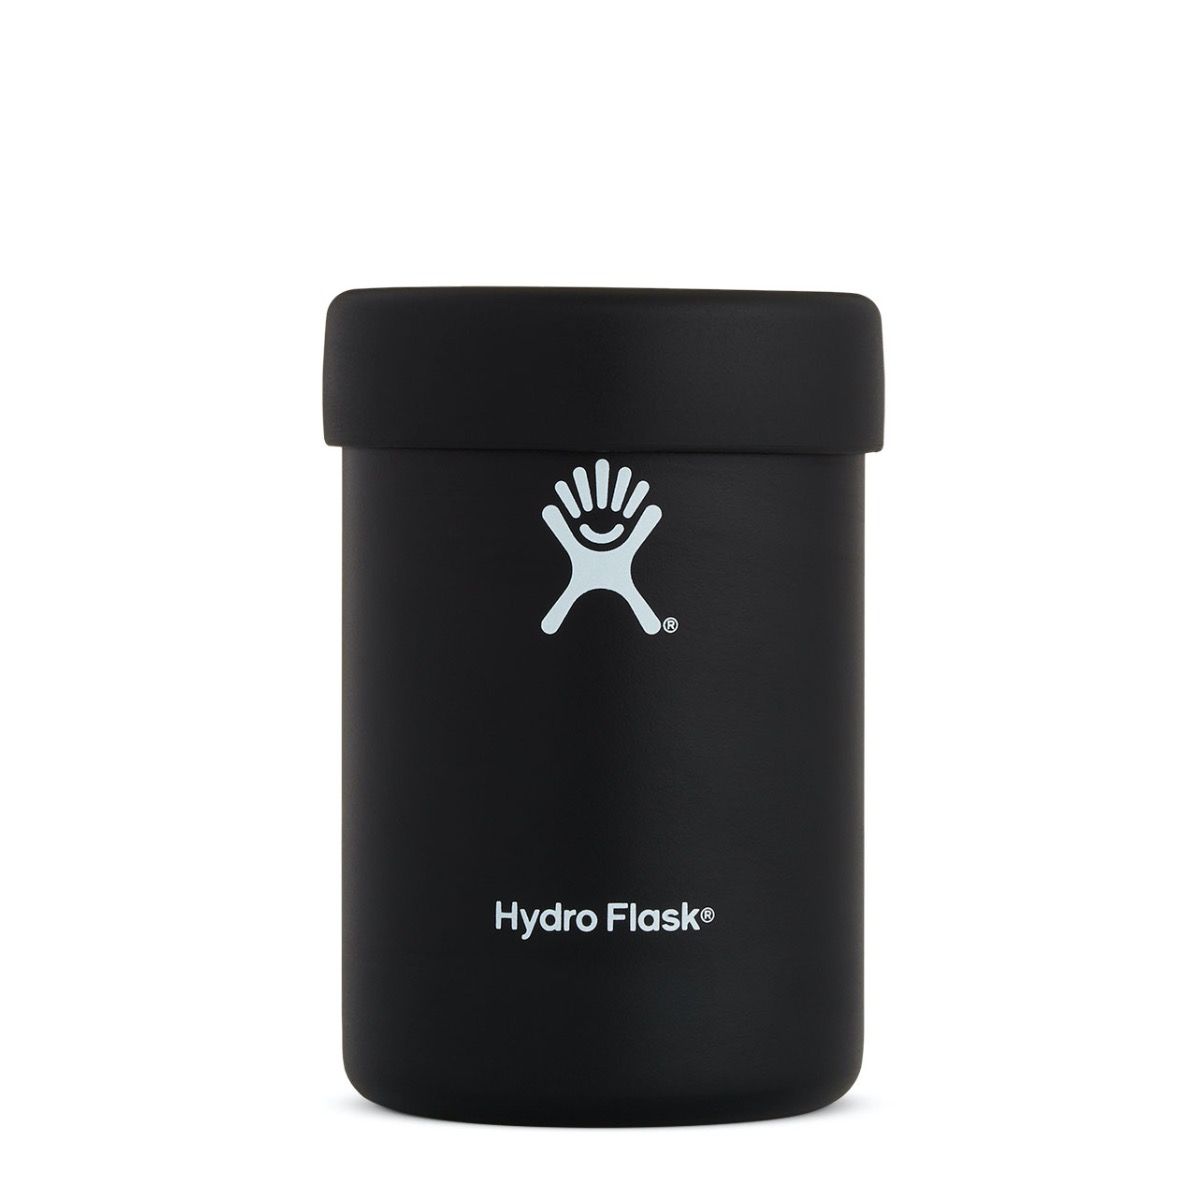 Hydro Flask Cooler Cup 12oz - Black